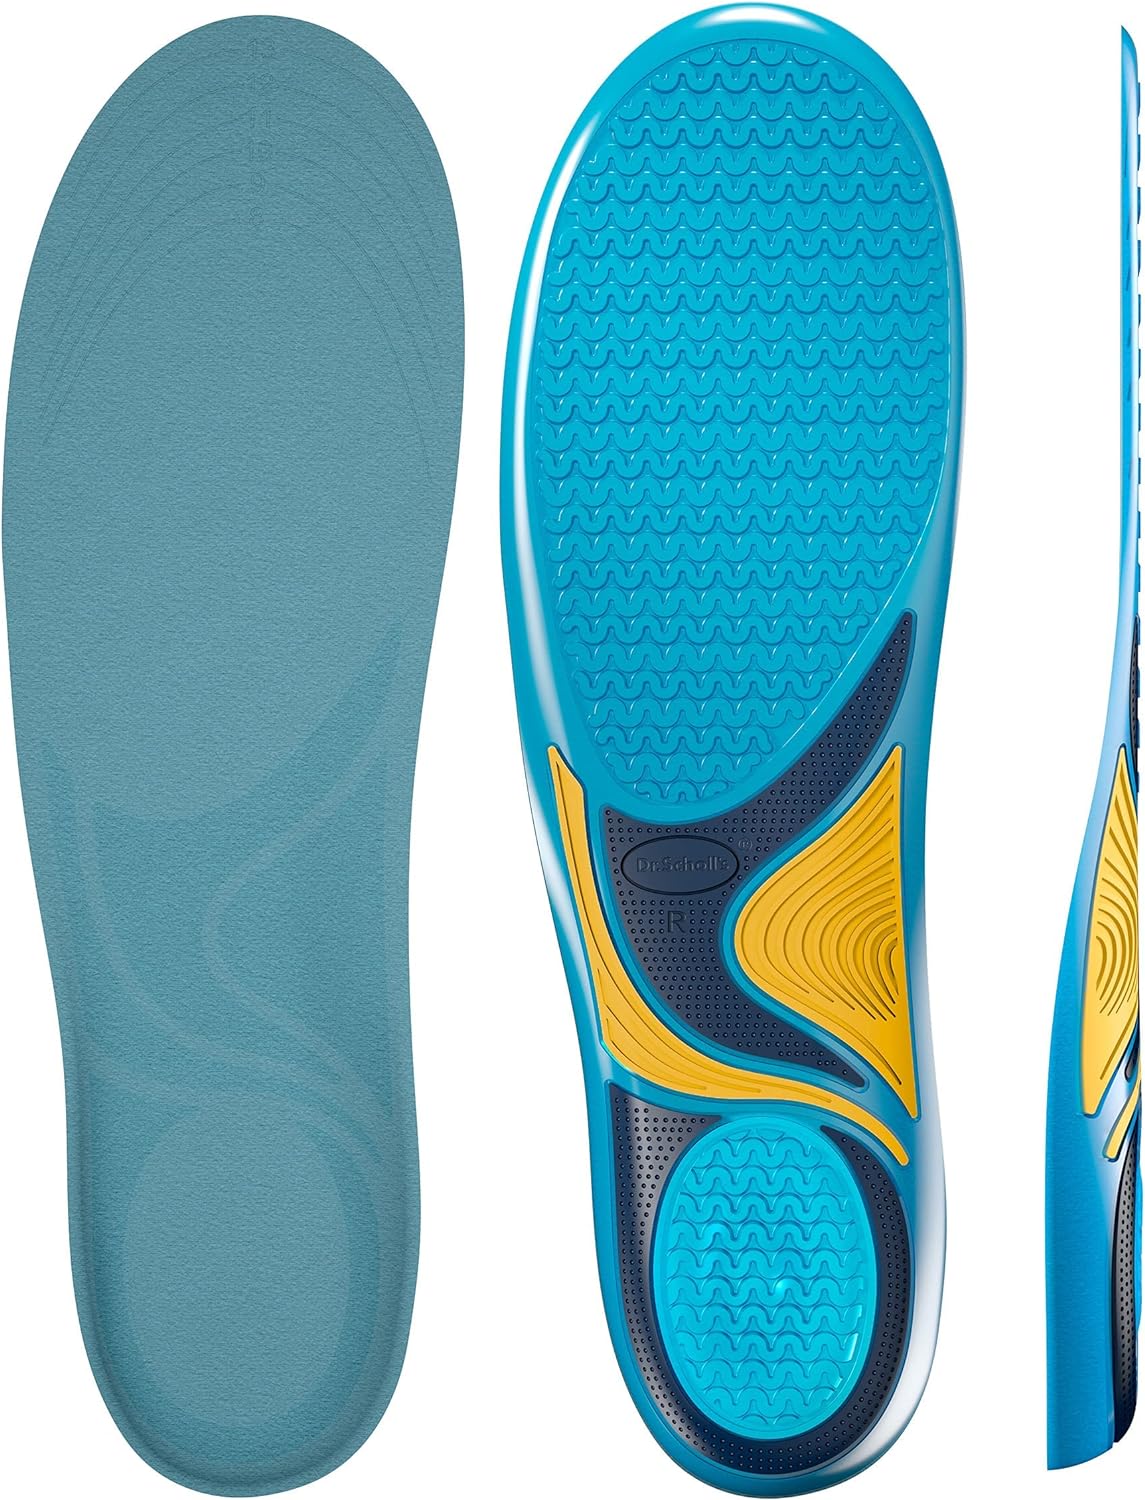 Dr. Scholls Energizing Comfort Everyday Insoles with Massaging Gel®, On Feet All-Day, Shock Absorbing, Arch Support,Trim Inserts to Fit Shoes, Mens Size 8-14, 1 Pair